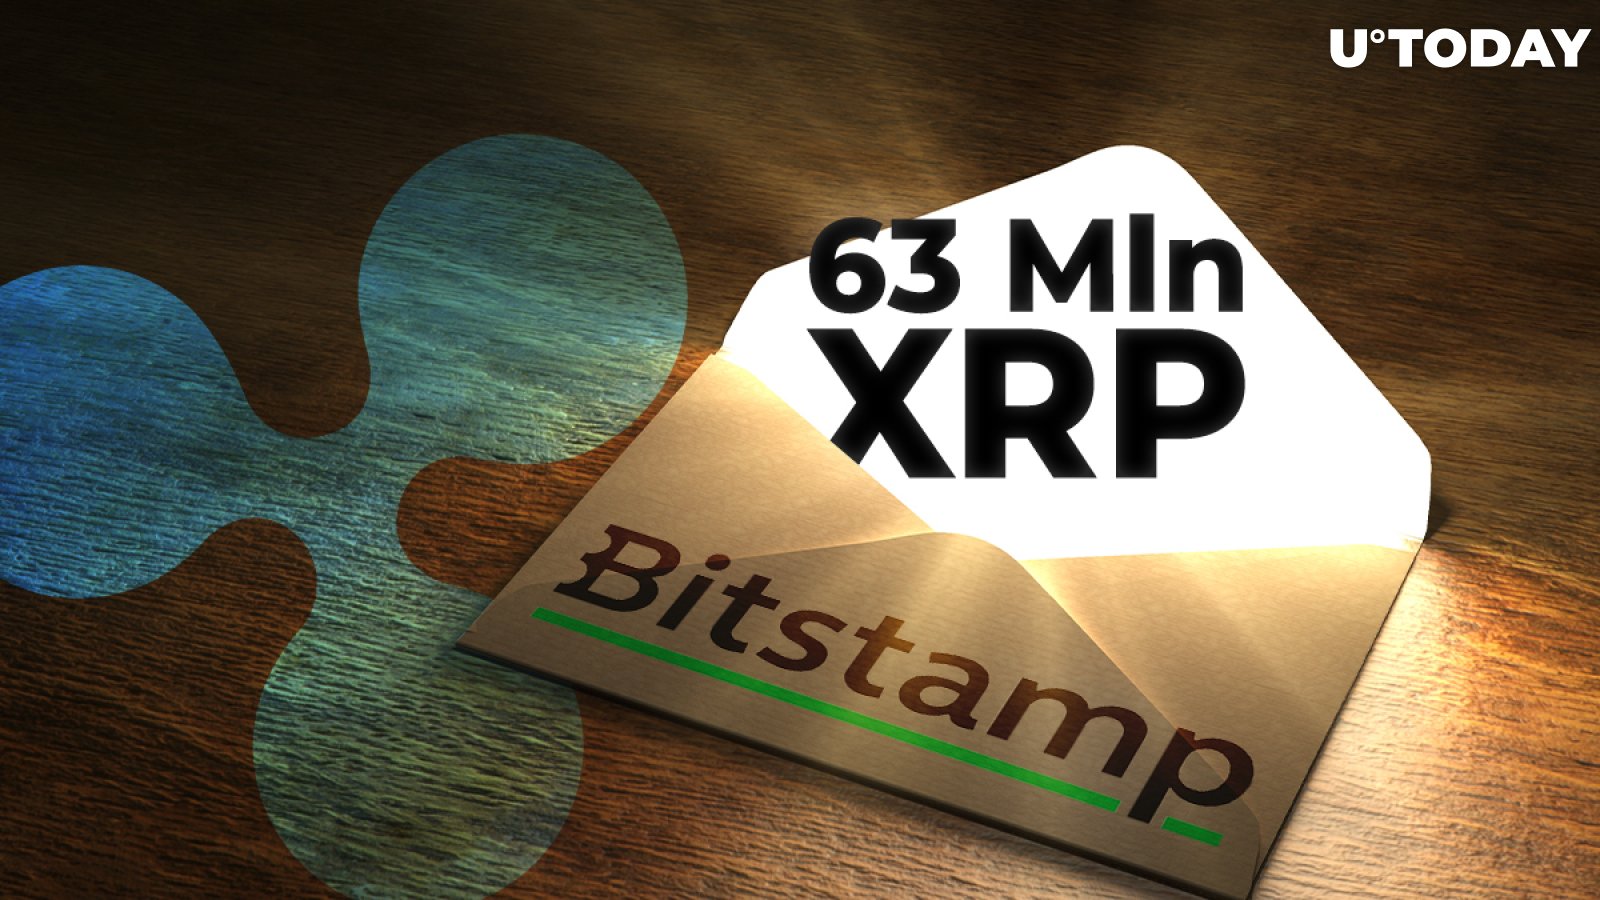 Does bitstamp have a ripple best buy today crypto